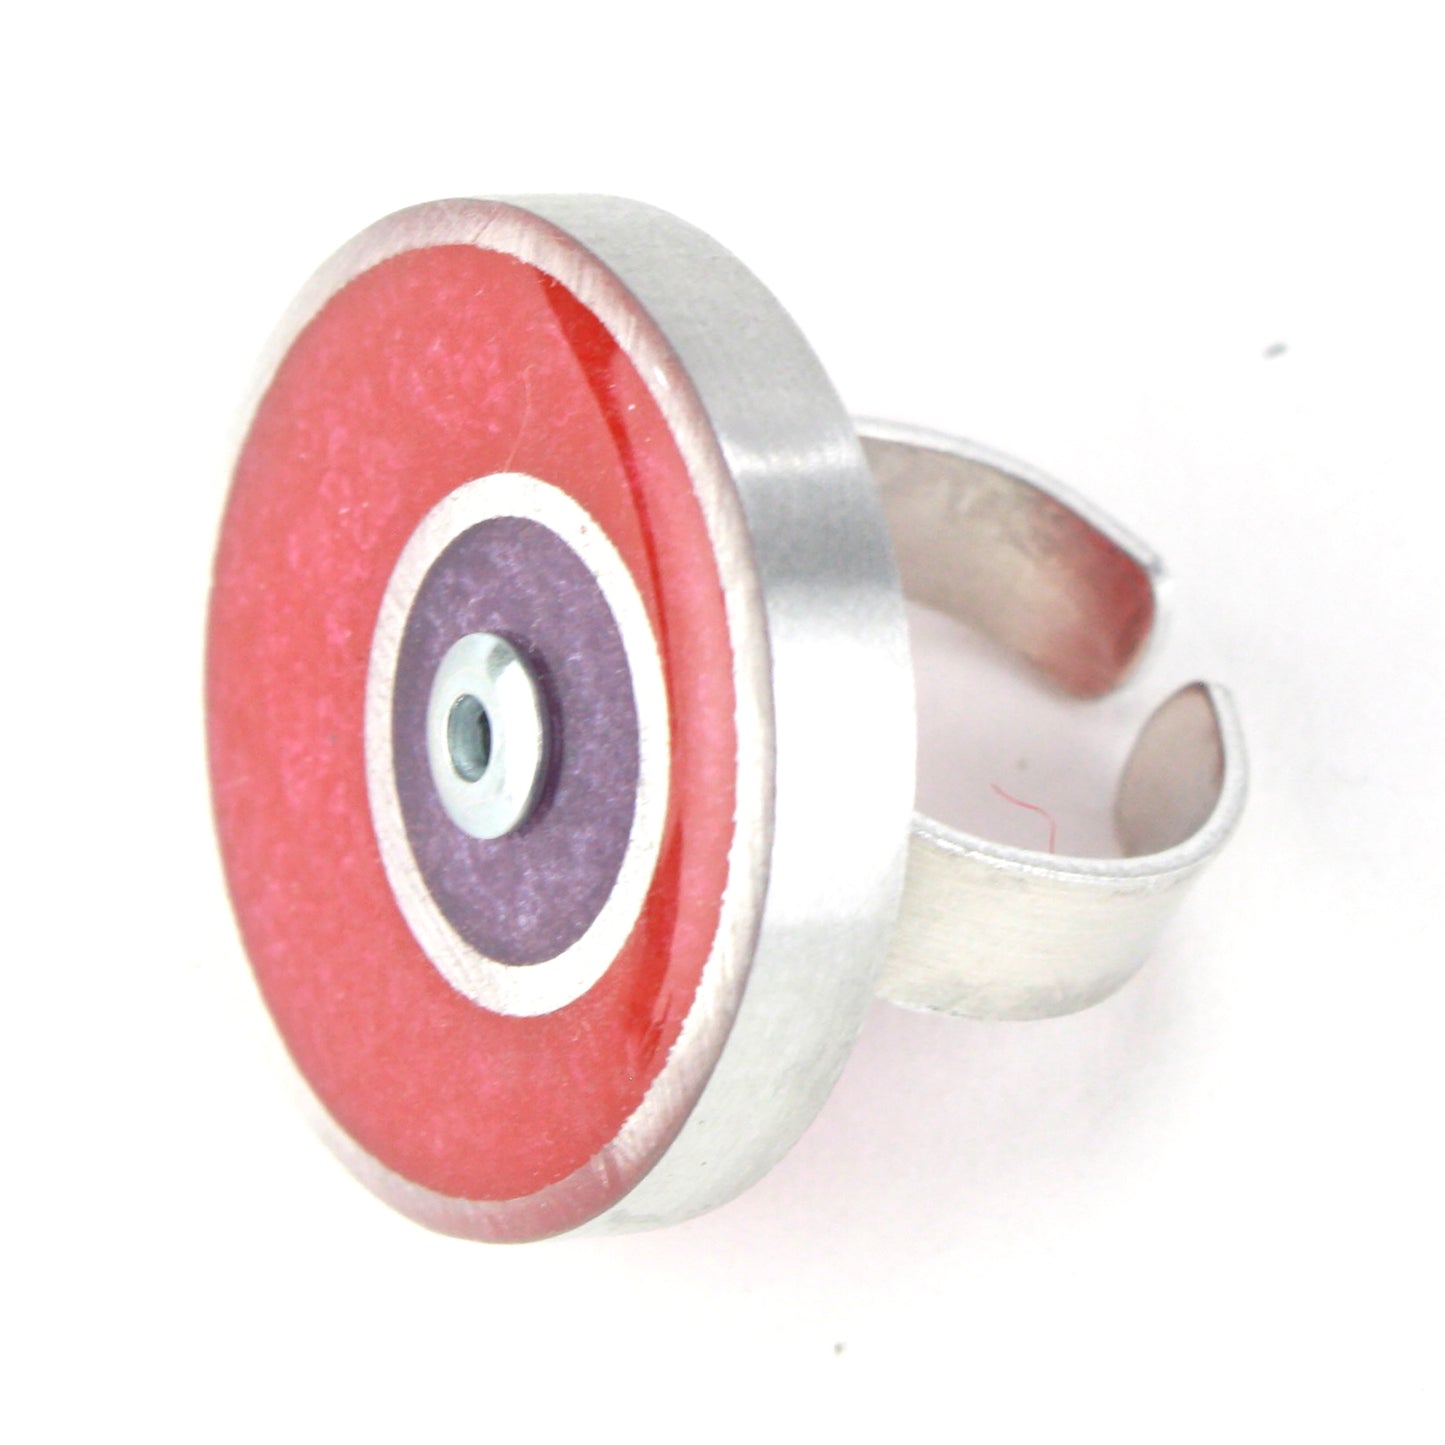 Resinique double circle ring - Red and purple